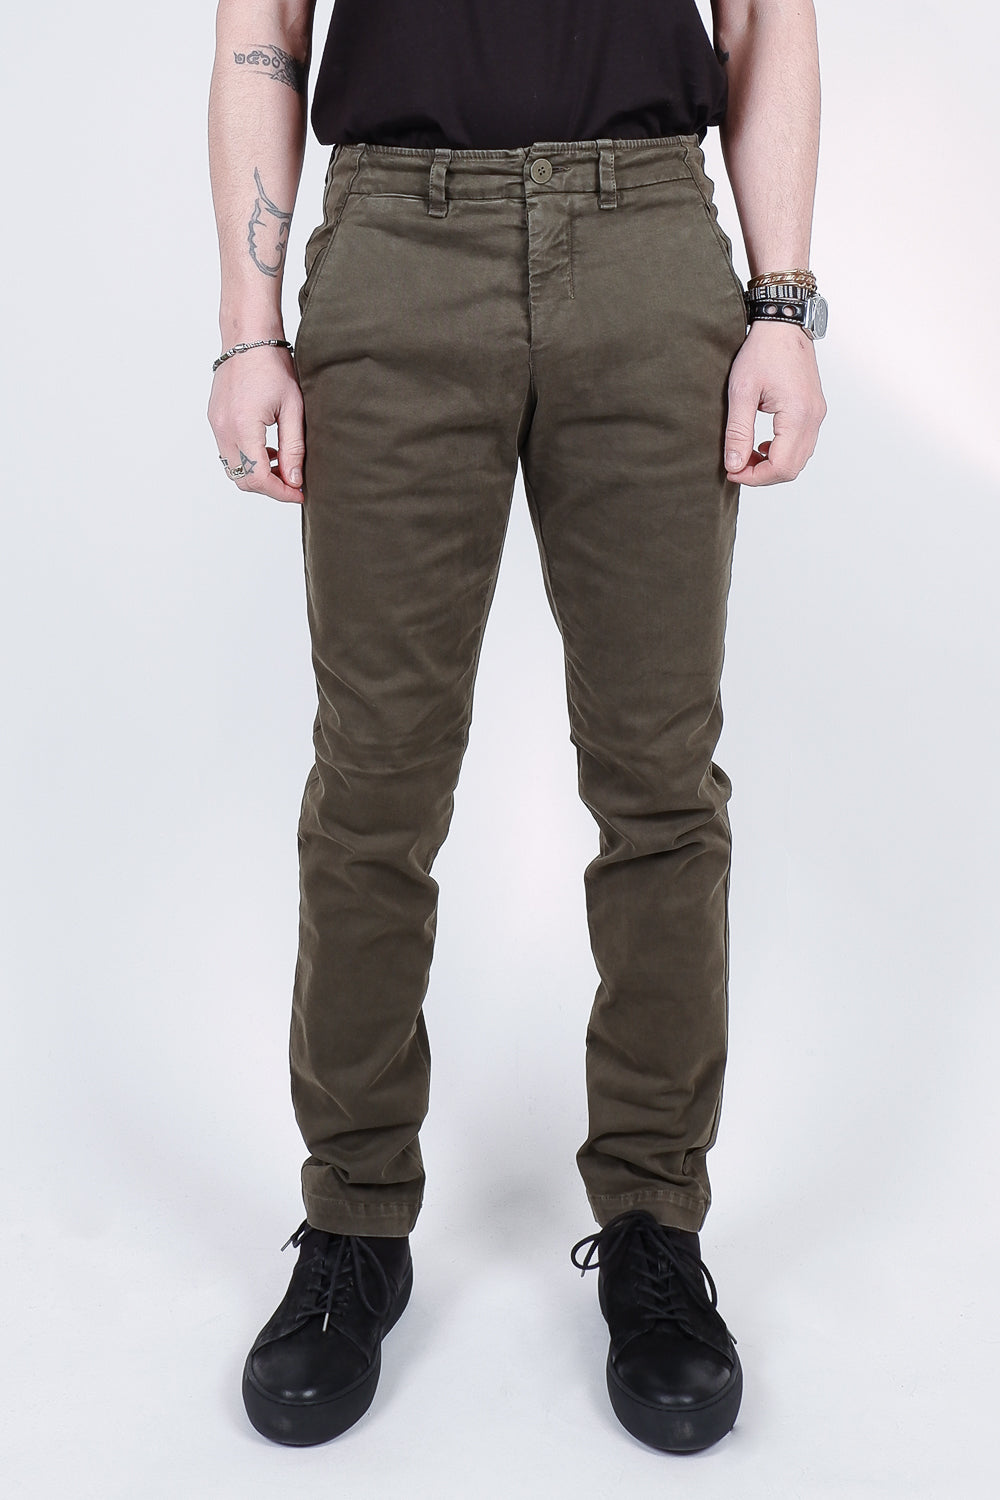 Buy the Transit Cotton Stretch Regular Fit Chinos in Khaki at Intro. Spend £50 for free UK delivery. Official stockists. We ship worldwide.